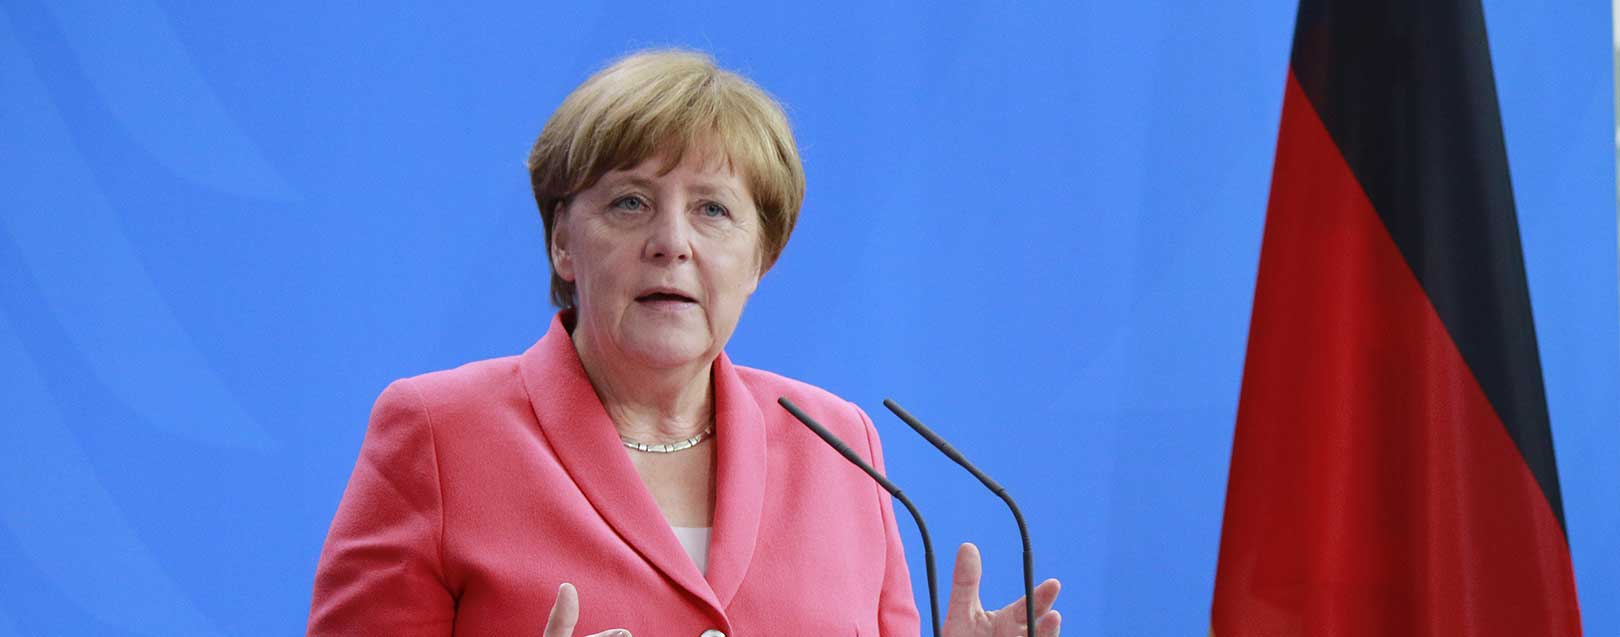 Merkel visits Argentina, discusses trade and climate change